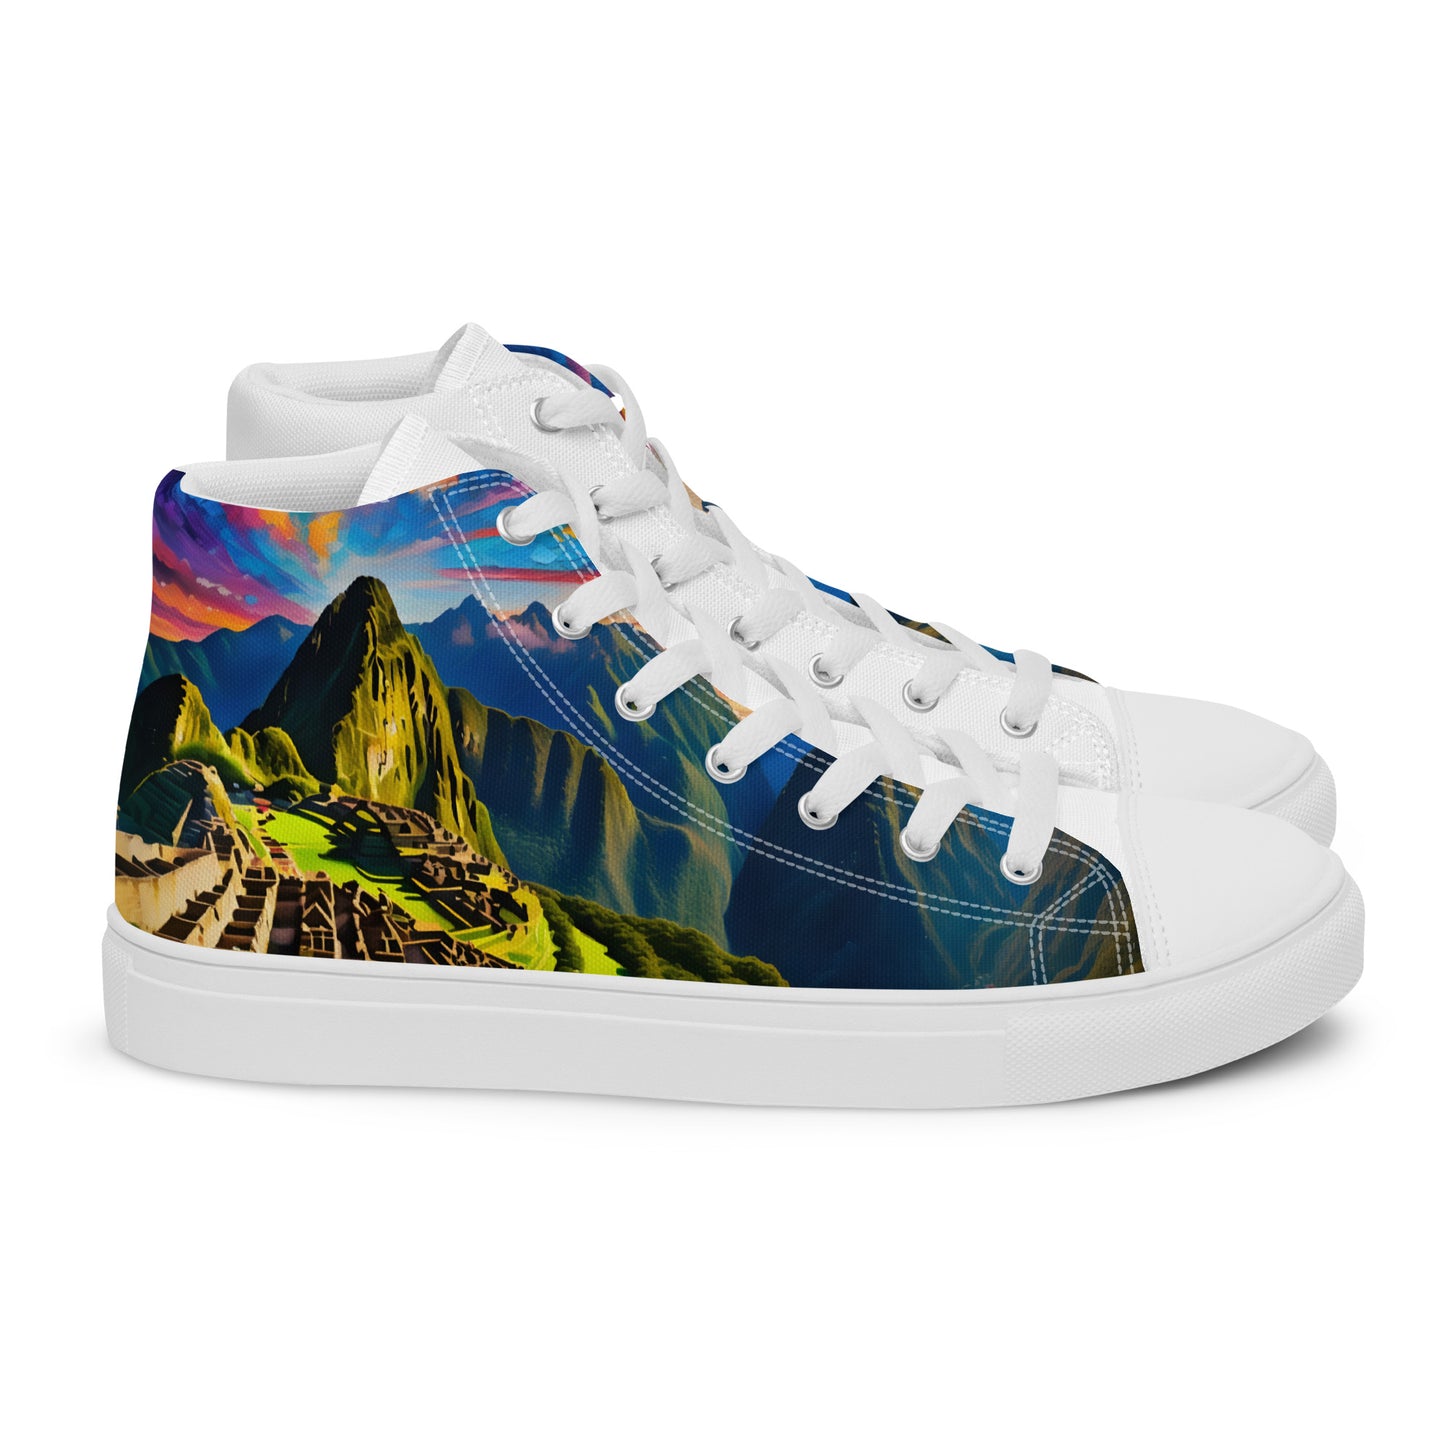 Machu Picchu - Stained glass - Men - White - High top shoes